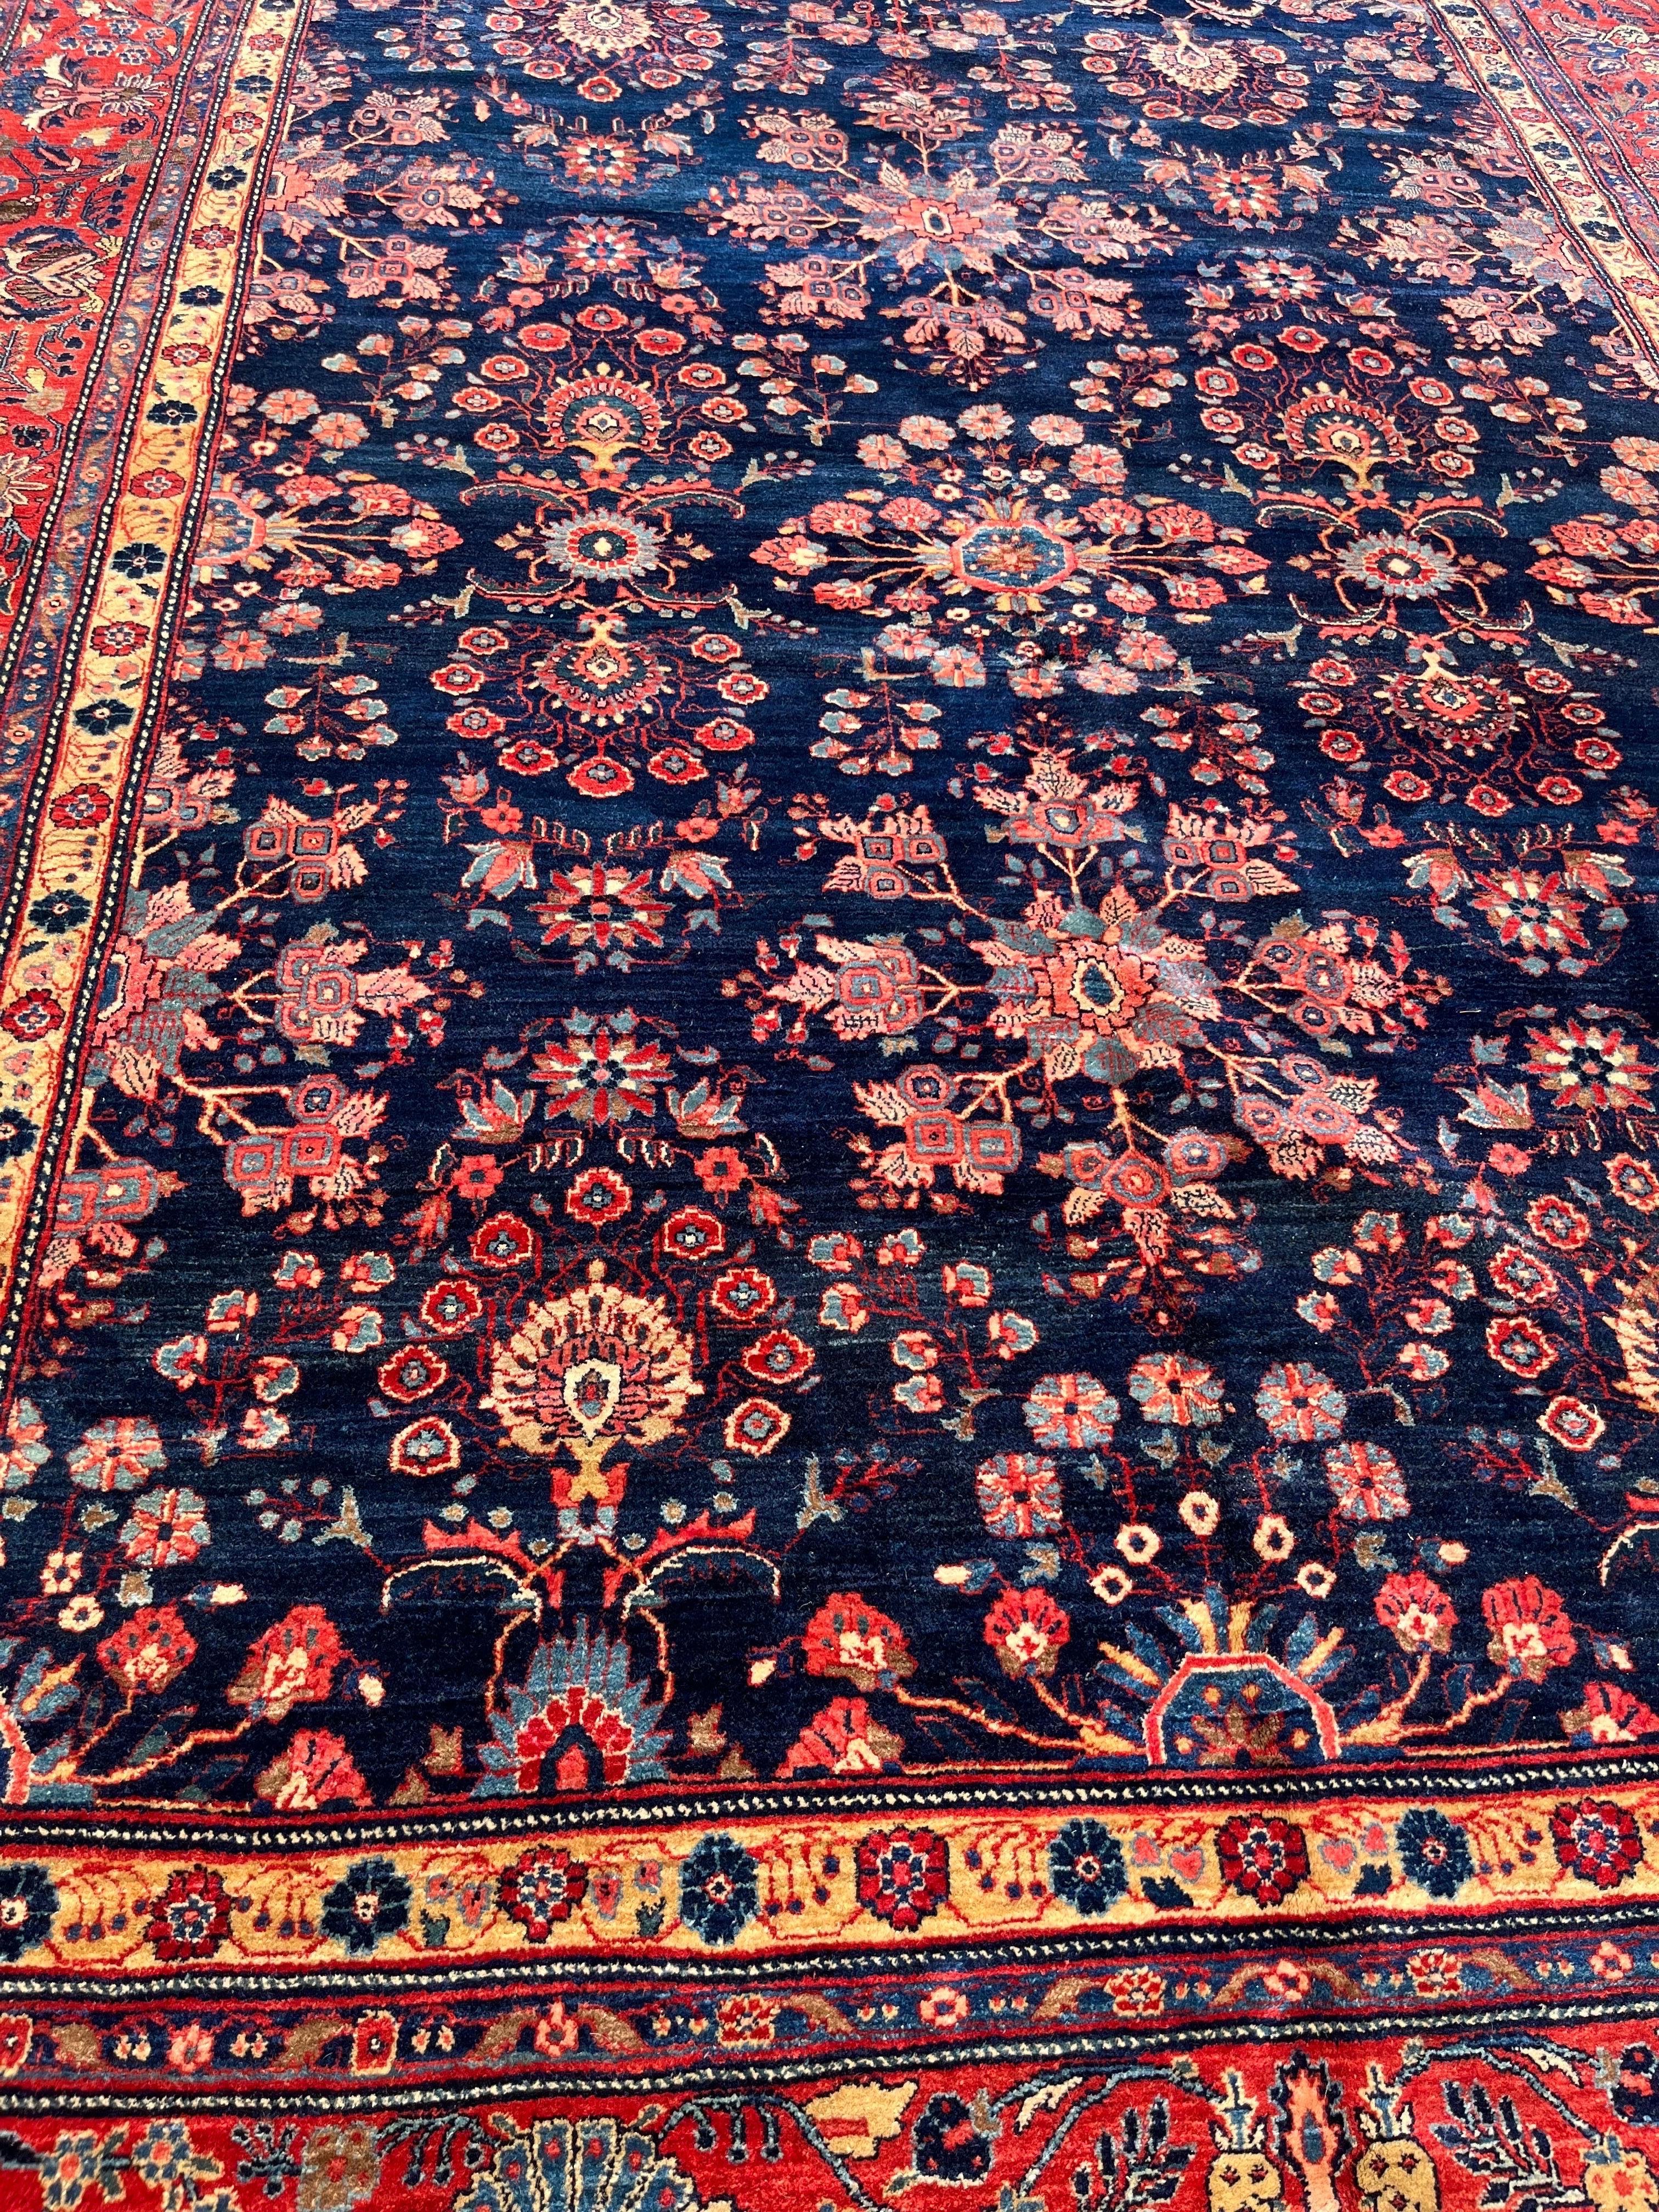 Very soft wool 9’1”x12’1”rug hand made in Persia over 100 years ago. Beautiful floral spray design on a rare blue field with a tomato red border. This carpet will bring a richness and elegance to any room. 